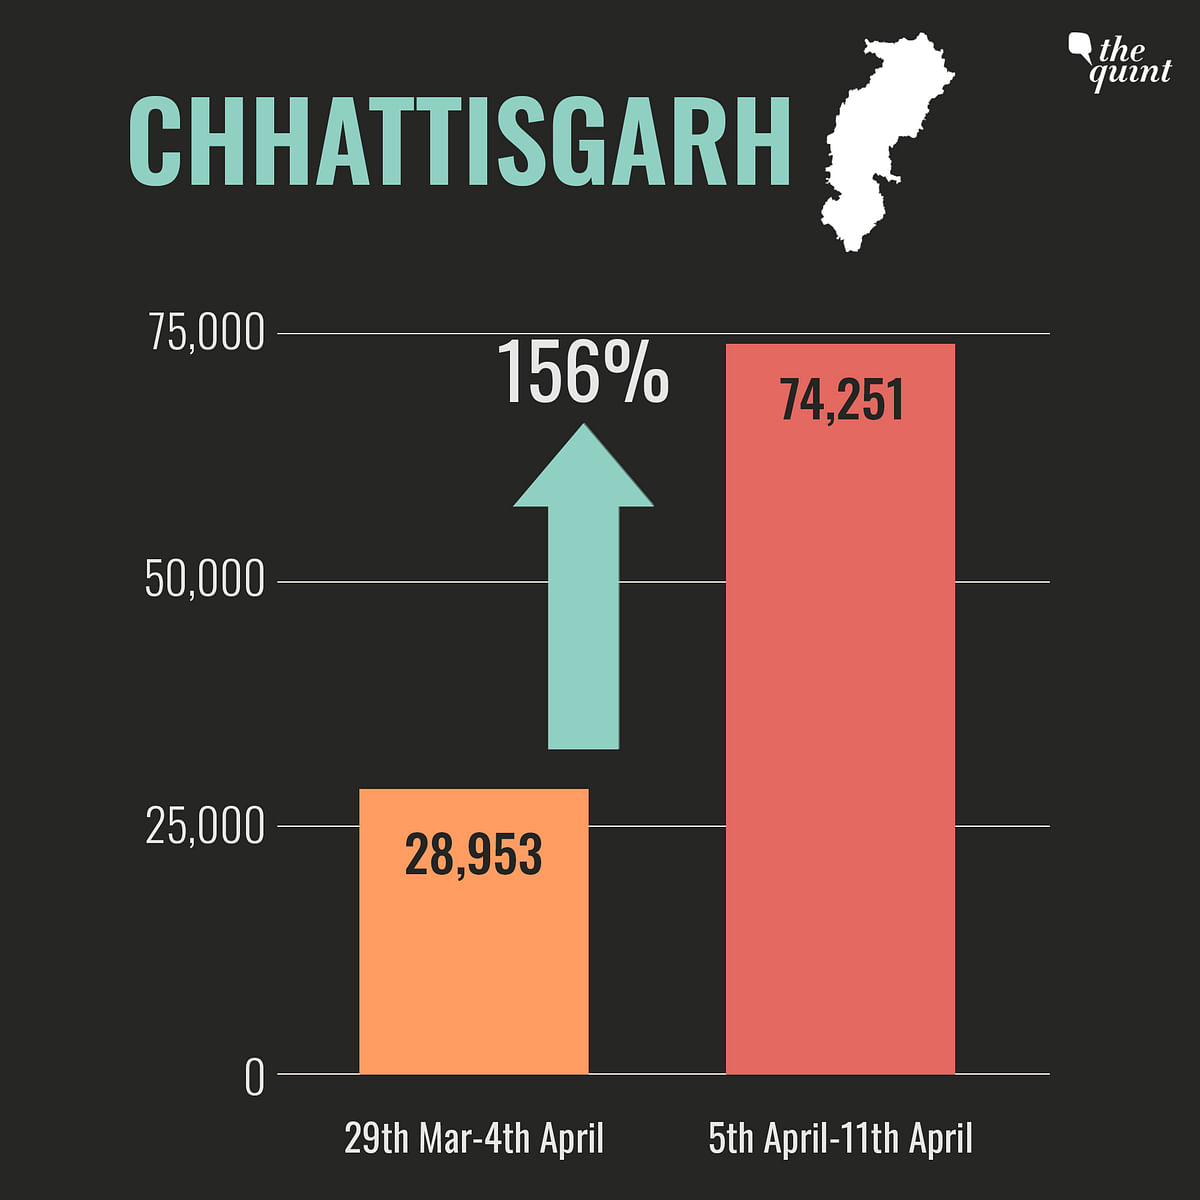 Bihar saw the sharpest increase last week, as cases rose more than four times compared to its tally previous week. 